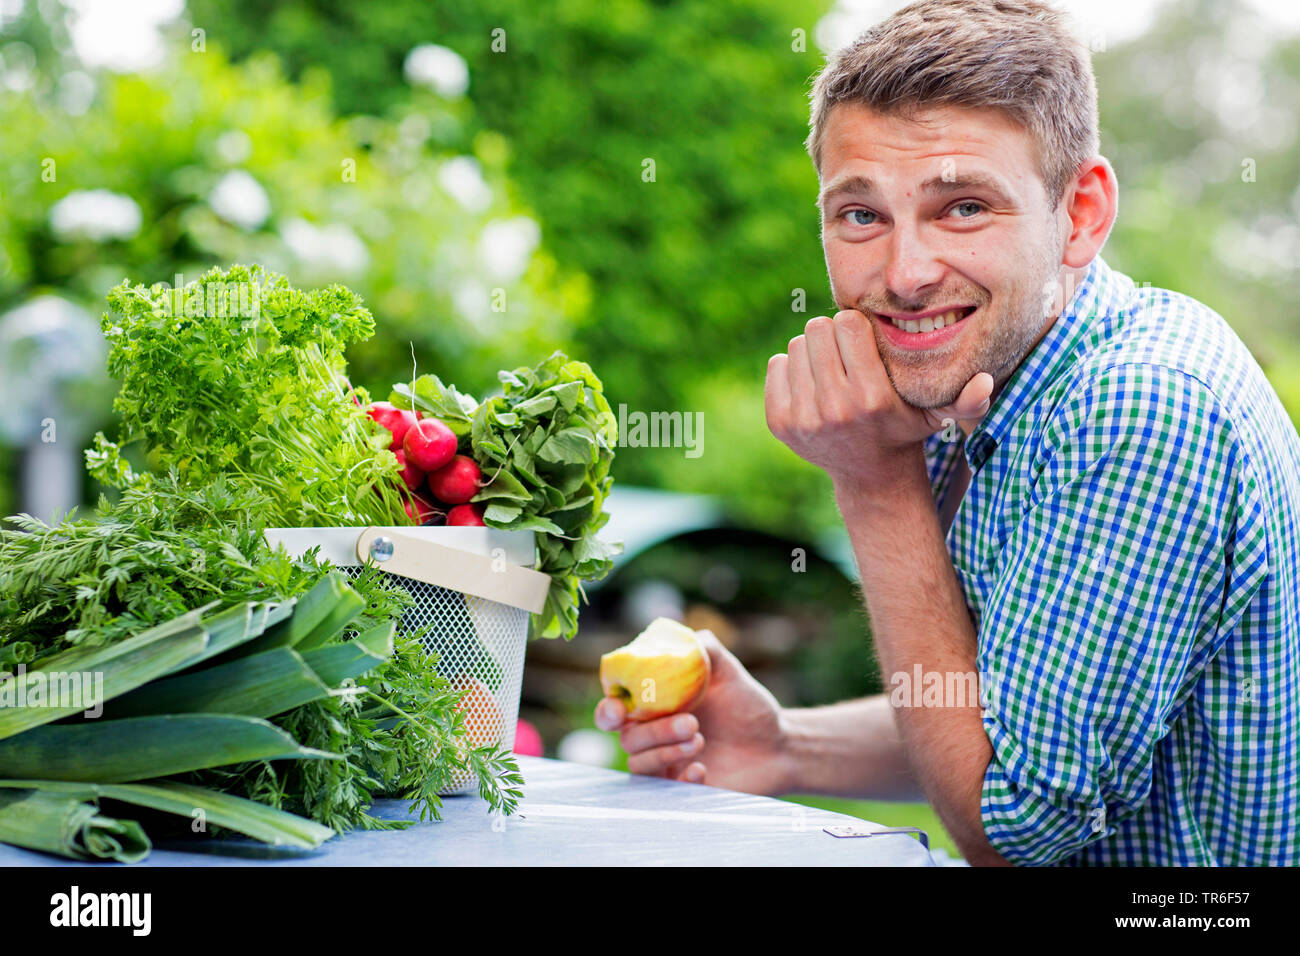 young man has bitten into a sour apple, Germany Stock Photo